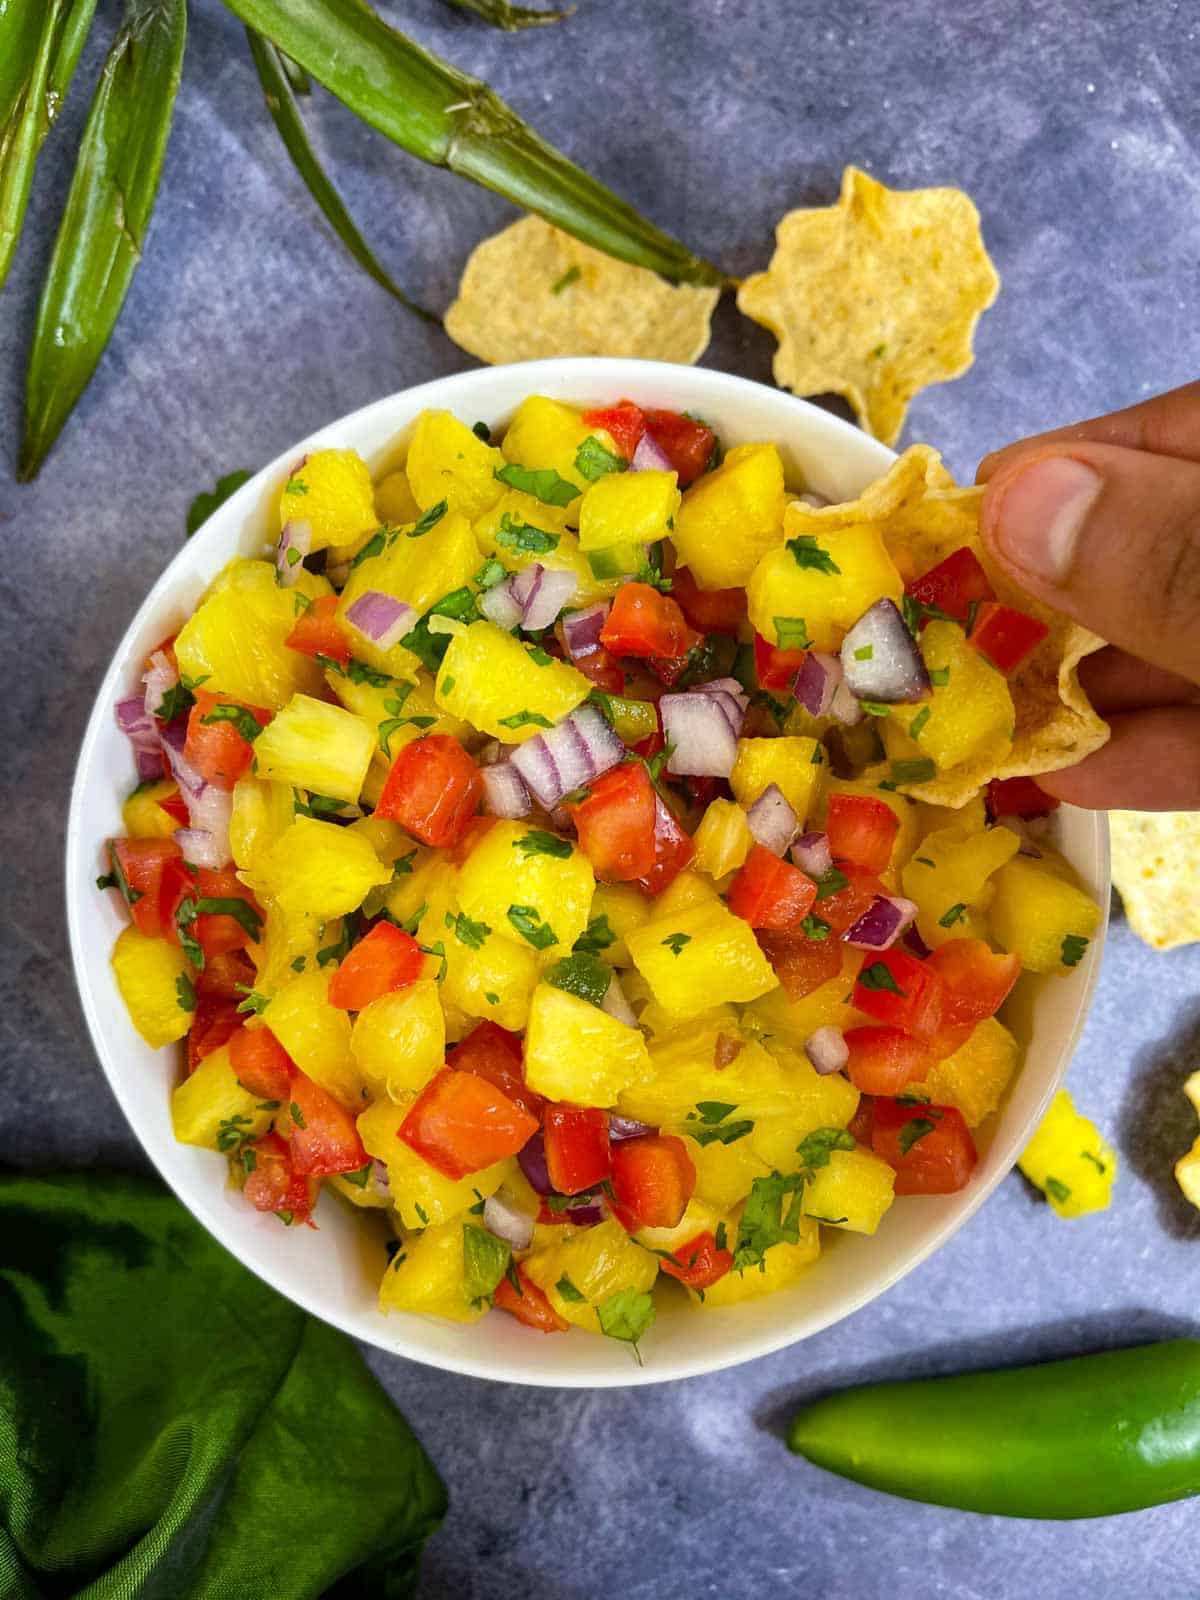 Pineapple salsa served in a bowl and scooping the salsa with chips